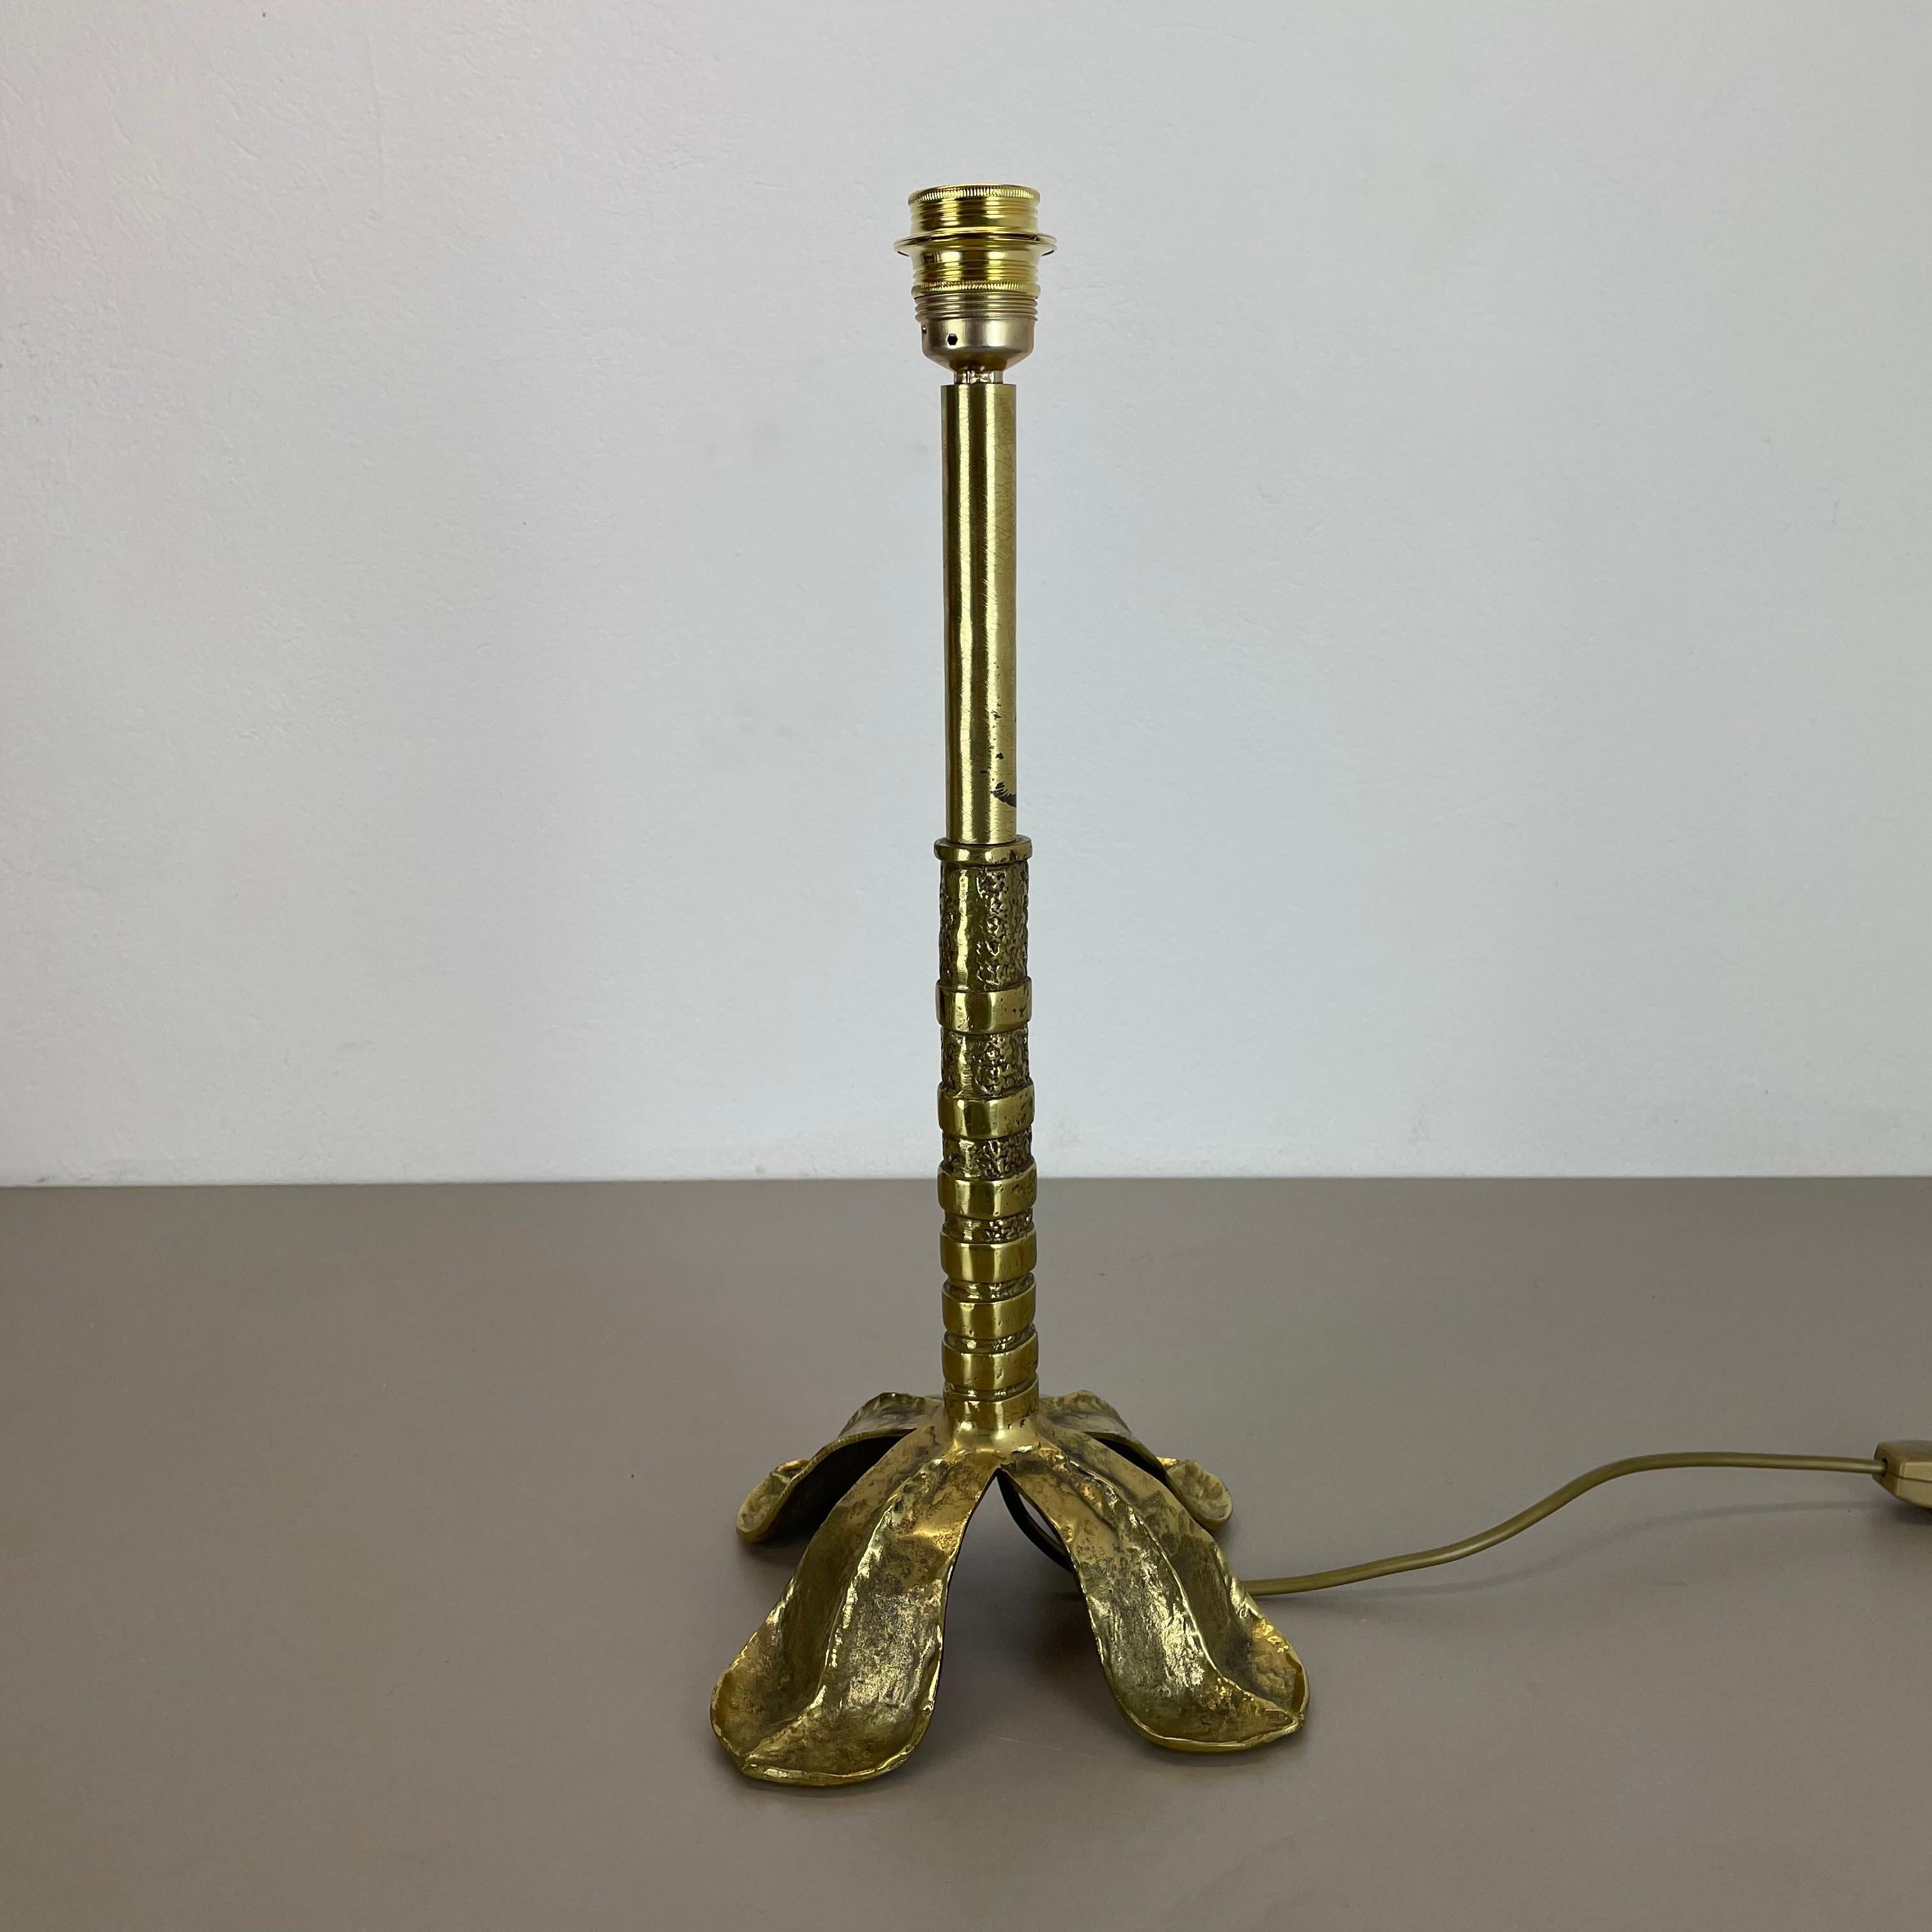 Original Hollywood Regency Style Floral Brutalist Brass Table Light, Italy 1970s For Sale 4